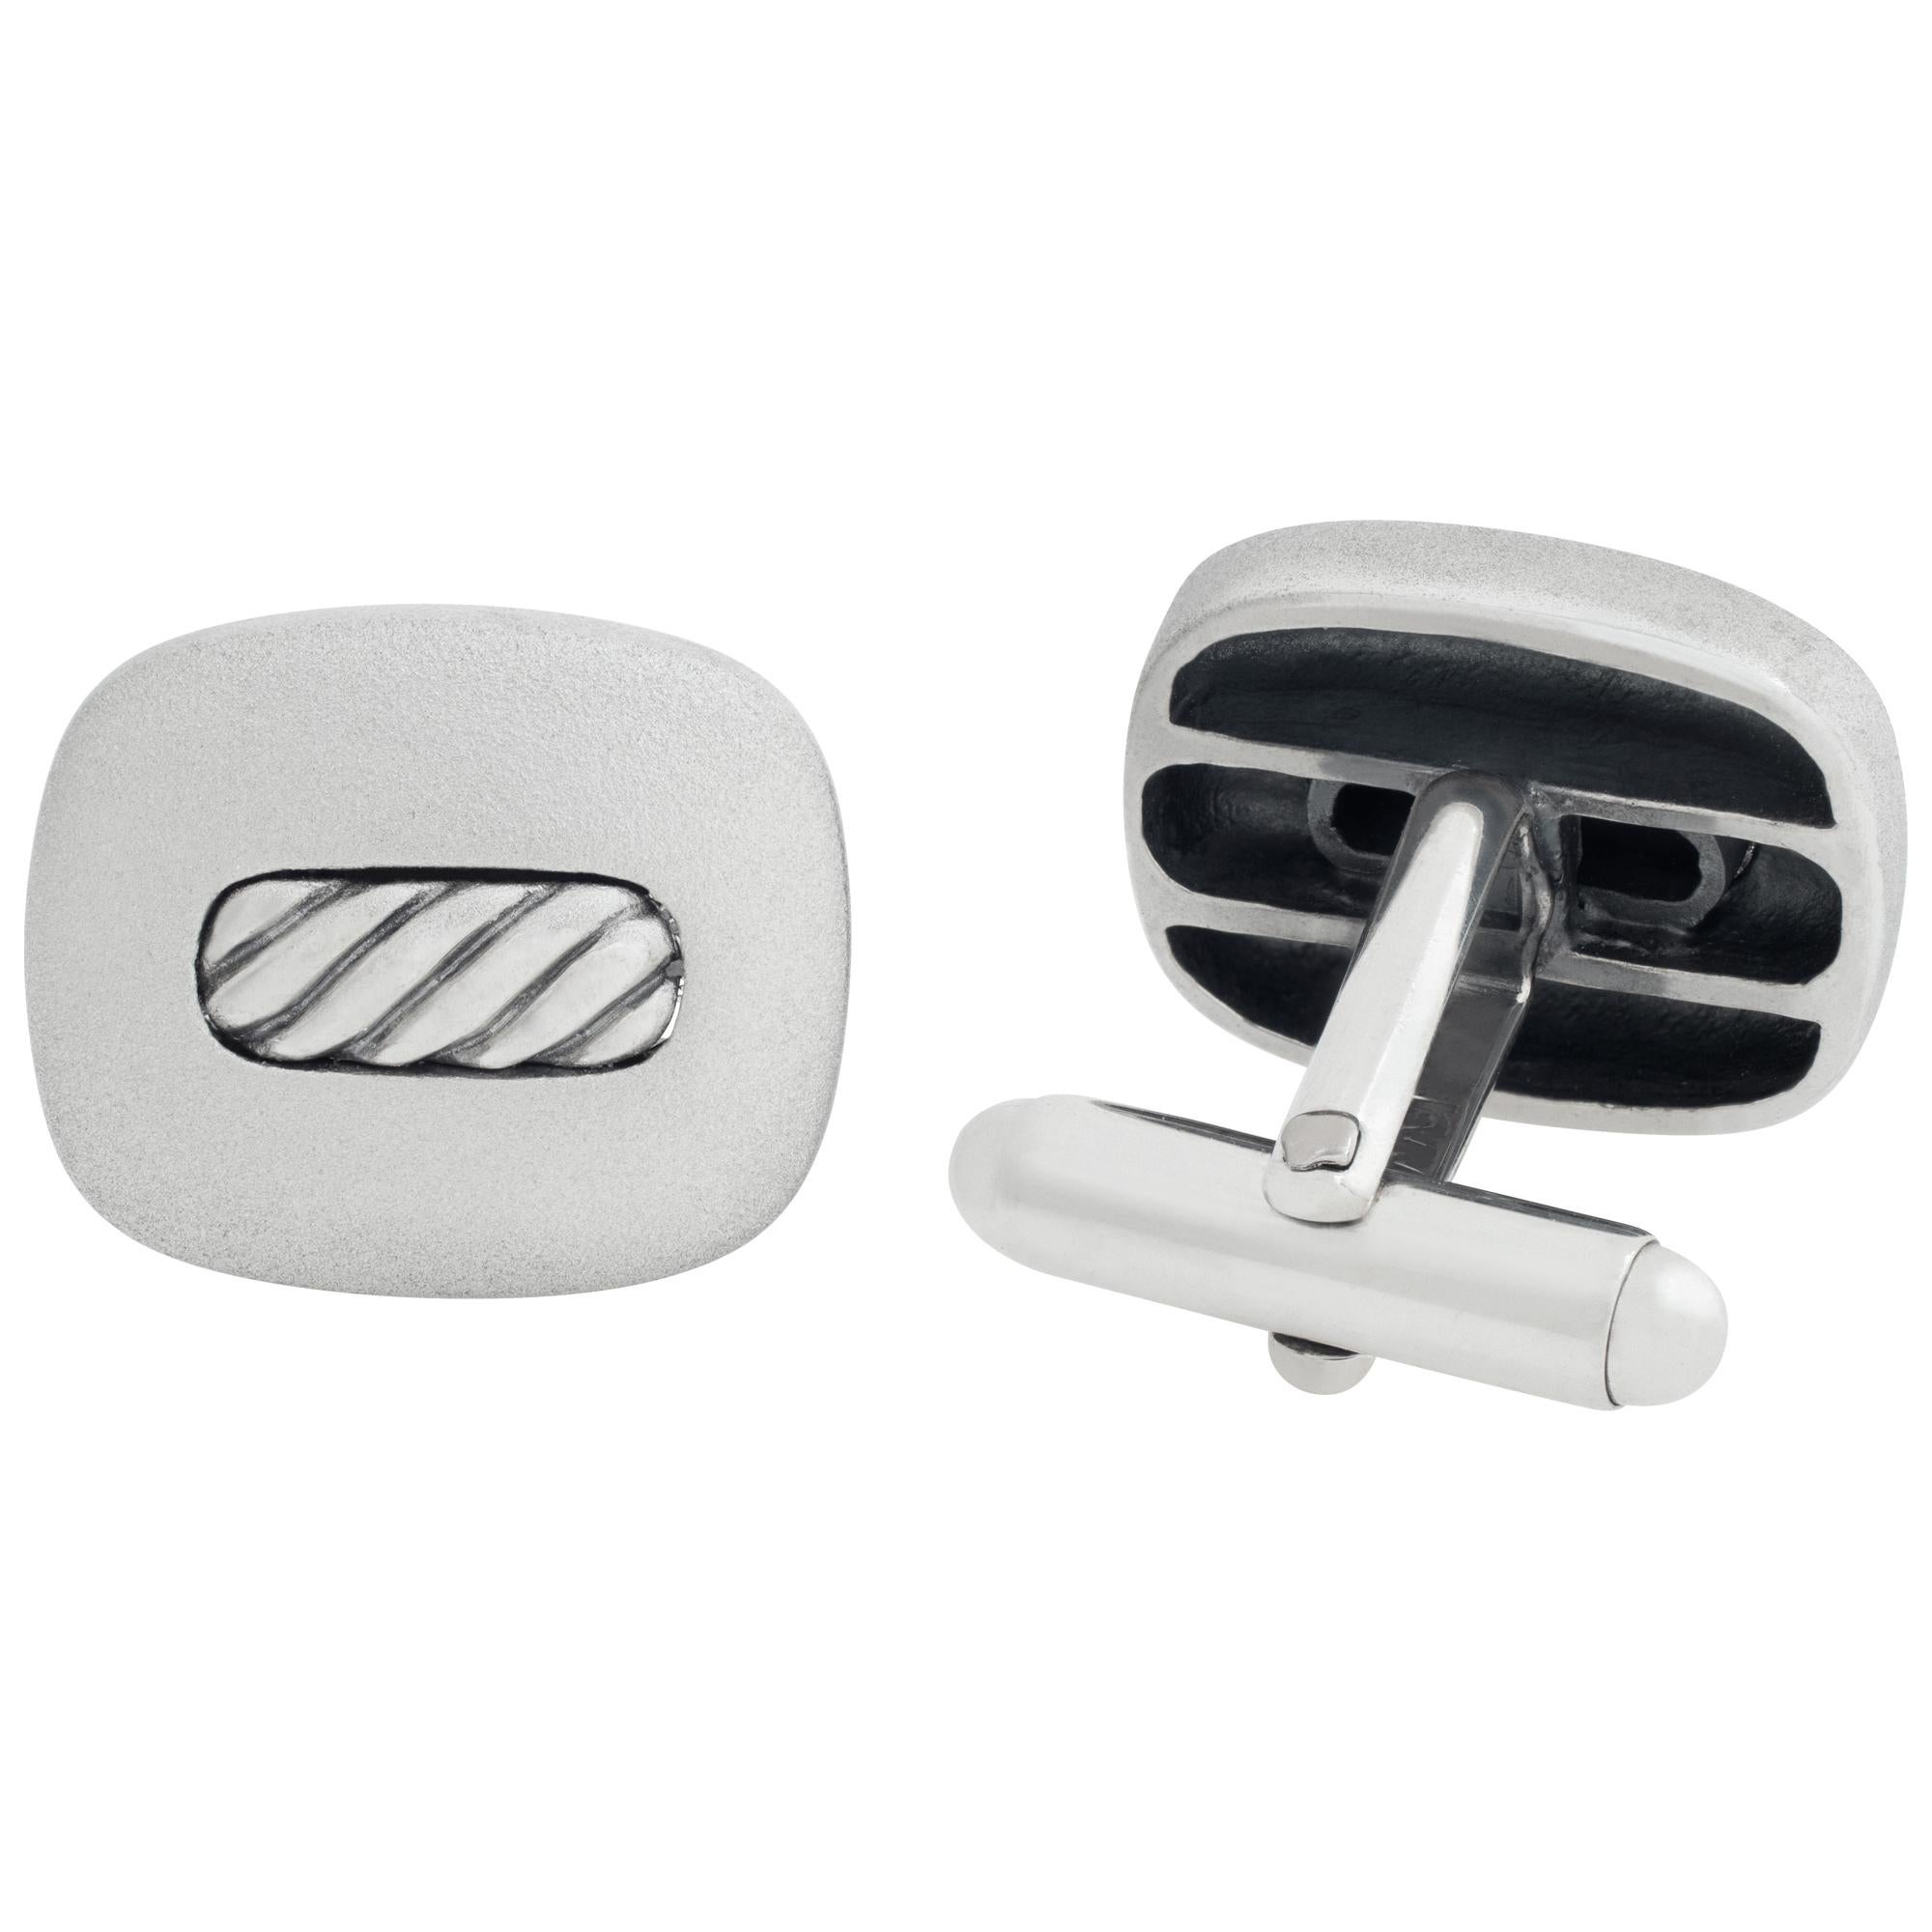 David Yurman DY3 cufflinks in sterling silver with DY center cable accent. Measures 18.5mm x 15.5mm.
